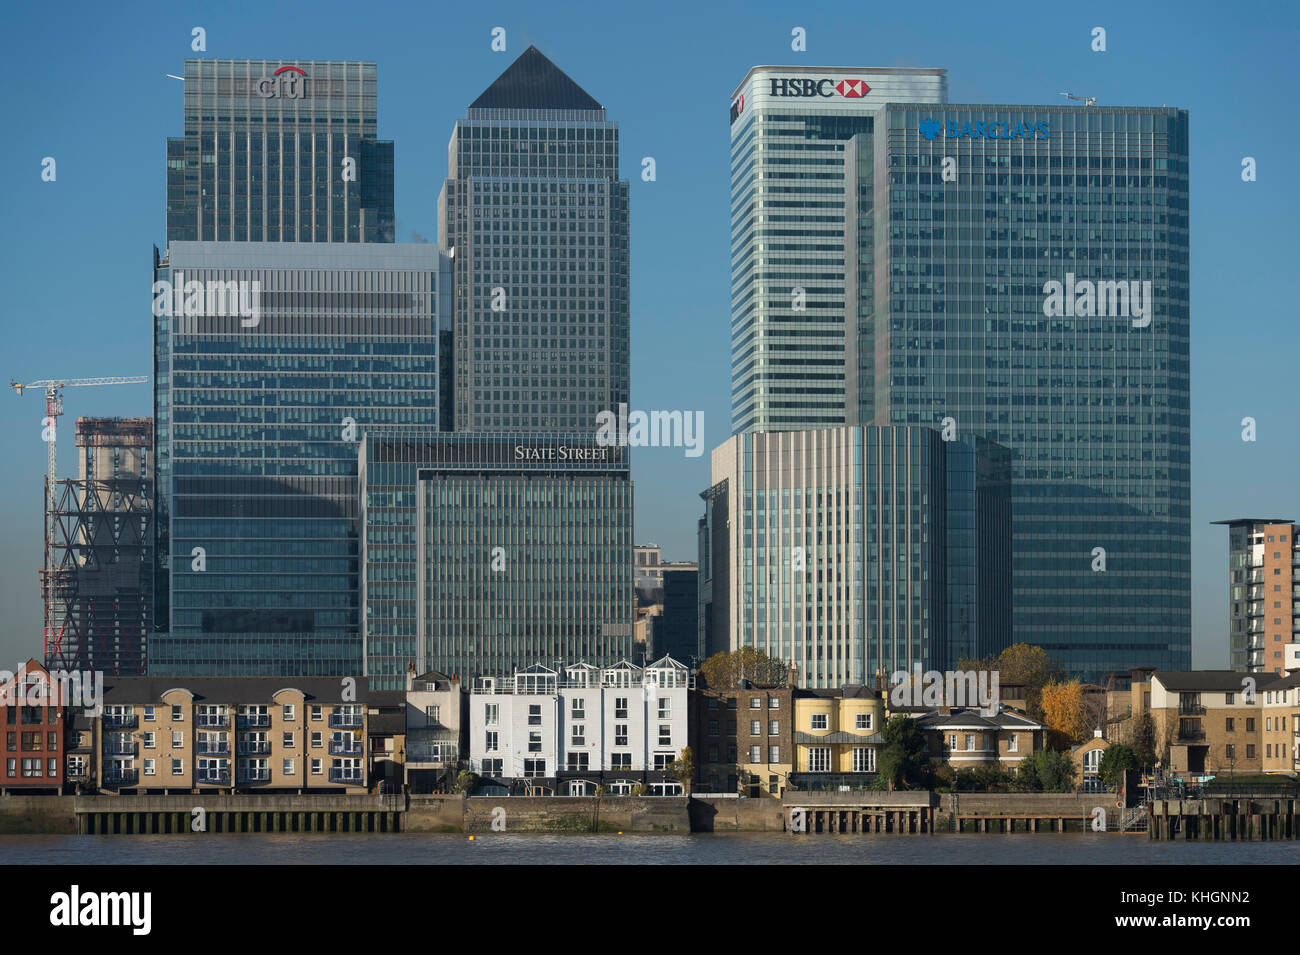 Canary Wharf, London, UK. 17 November, 2017. Crisp and clear winter morning in London’s docklands with Canary Wharf skyscrapers against blue sky. Credit: Malcolm Park/Alamy Live News. Stock Photo